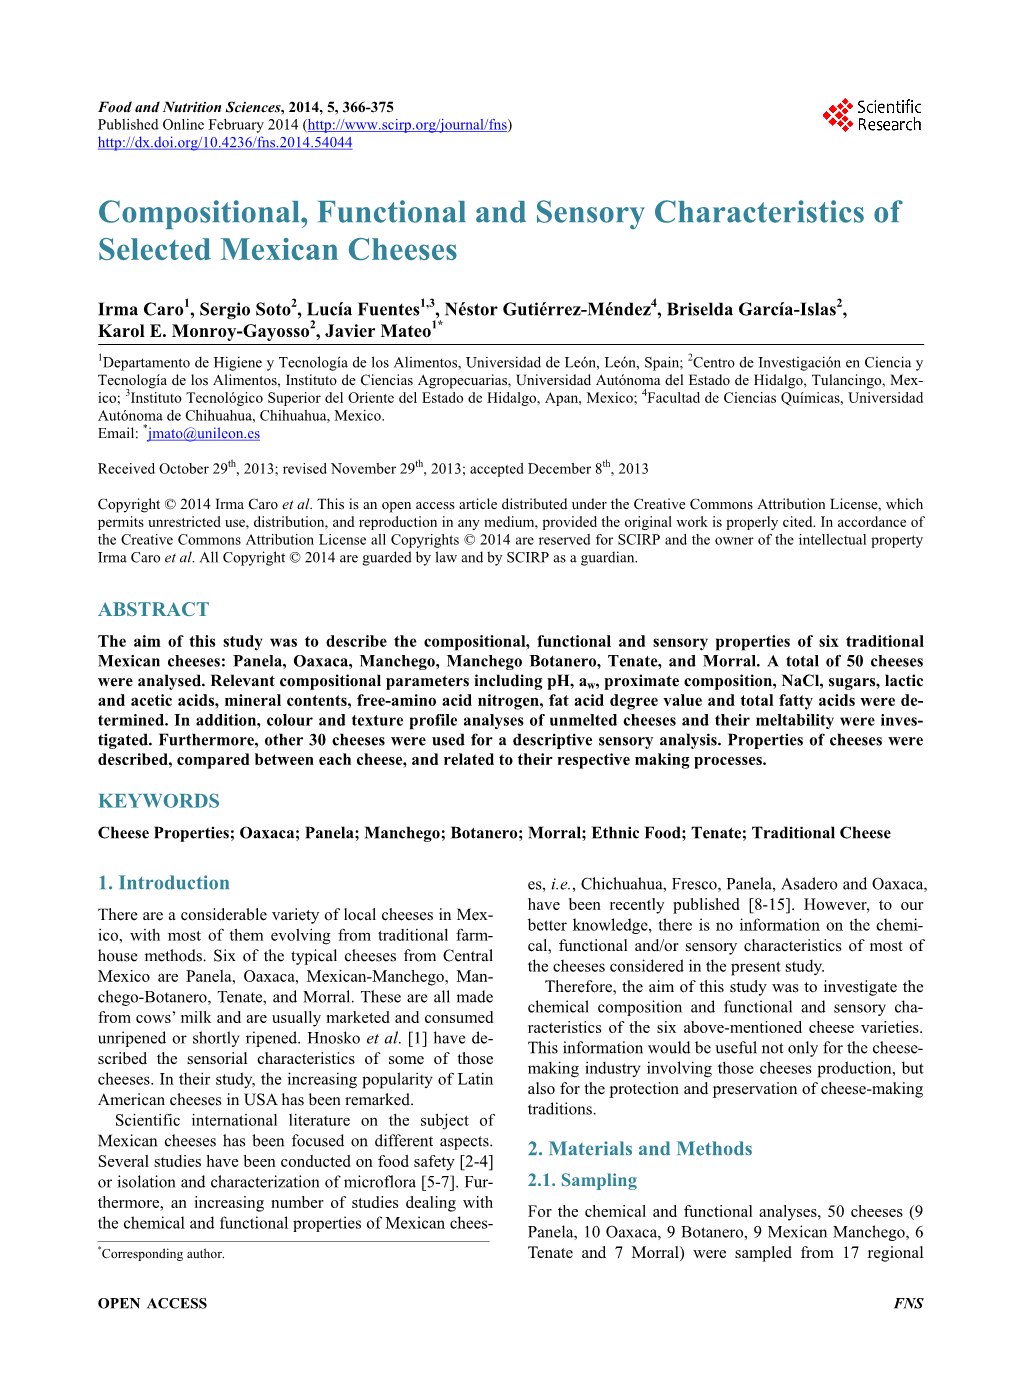 Compositional, Functional and Sensory Characteristics of Selected Mexican Cheeses